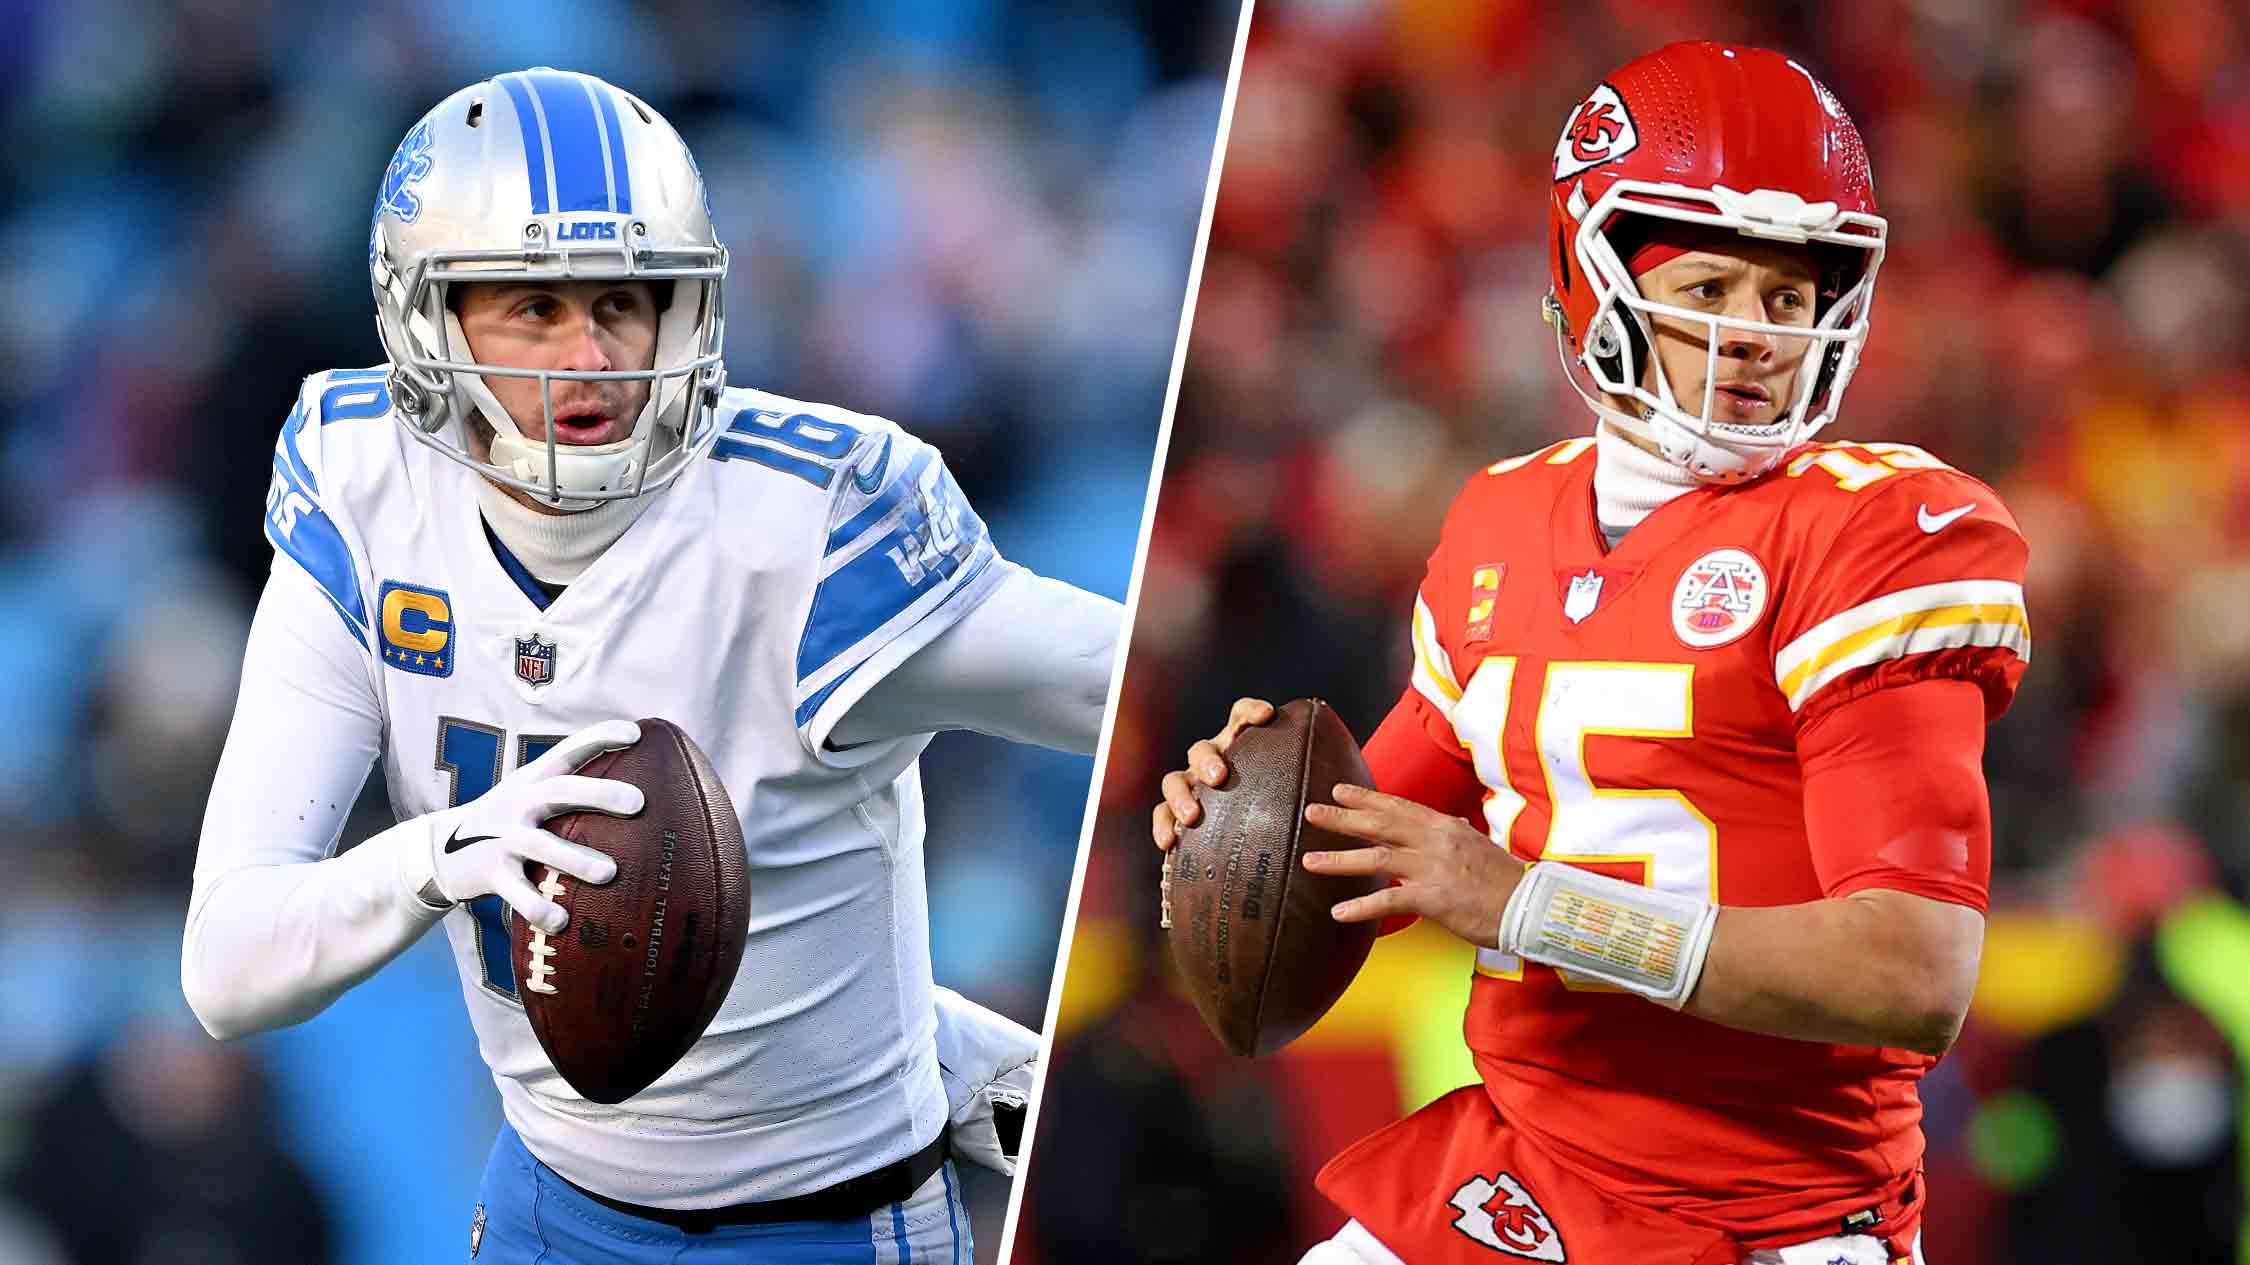 How to Stream the Thursday Night Football Chiefs vs. Lions Game